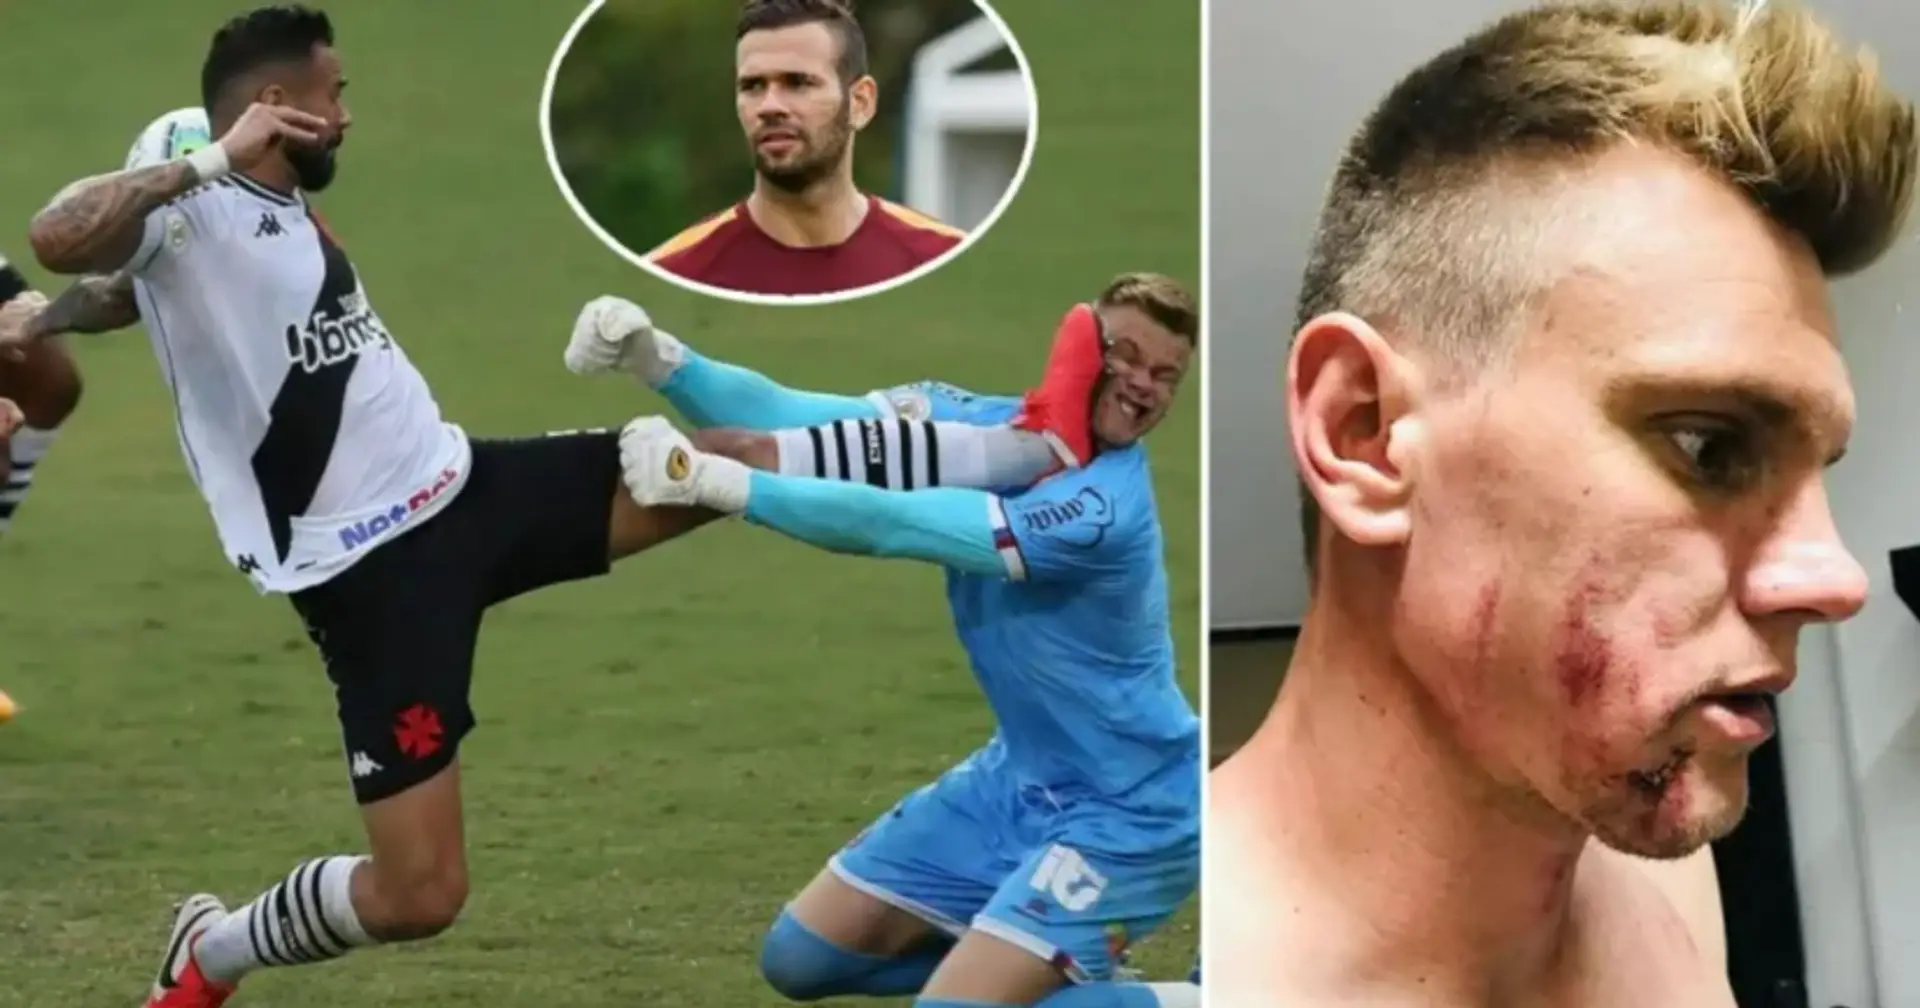 Castan's killer foul: opposition goalkeeper takes a big risk and leaves the pitch with a swollen face